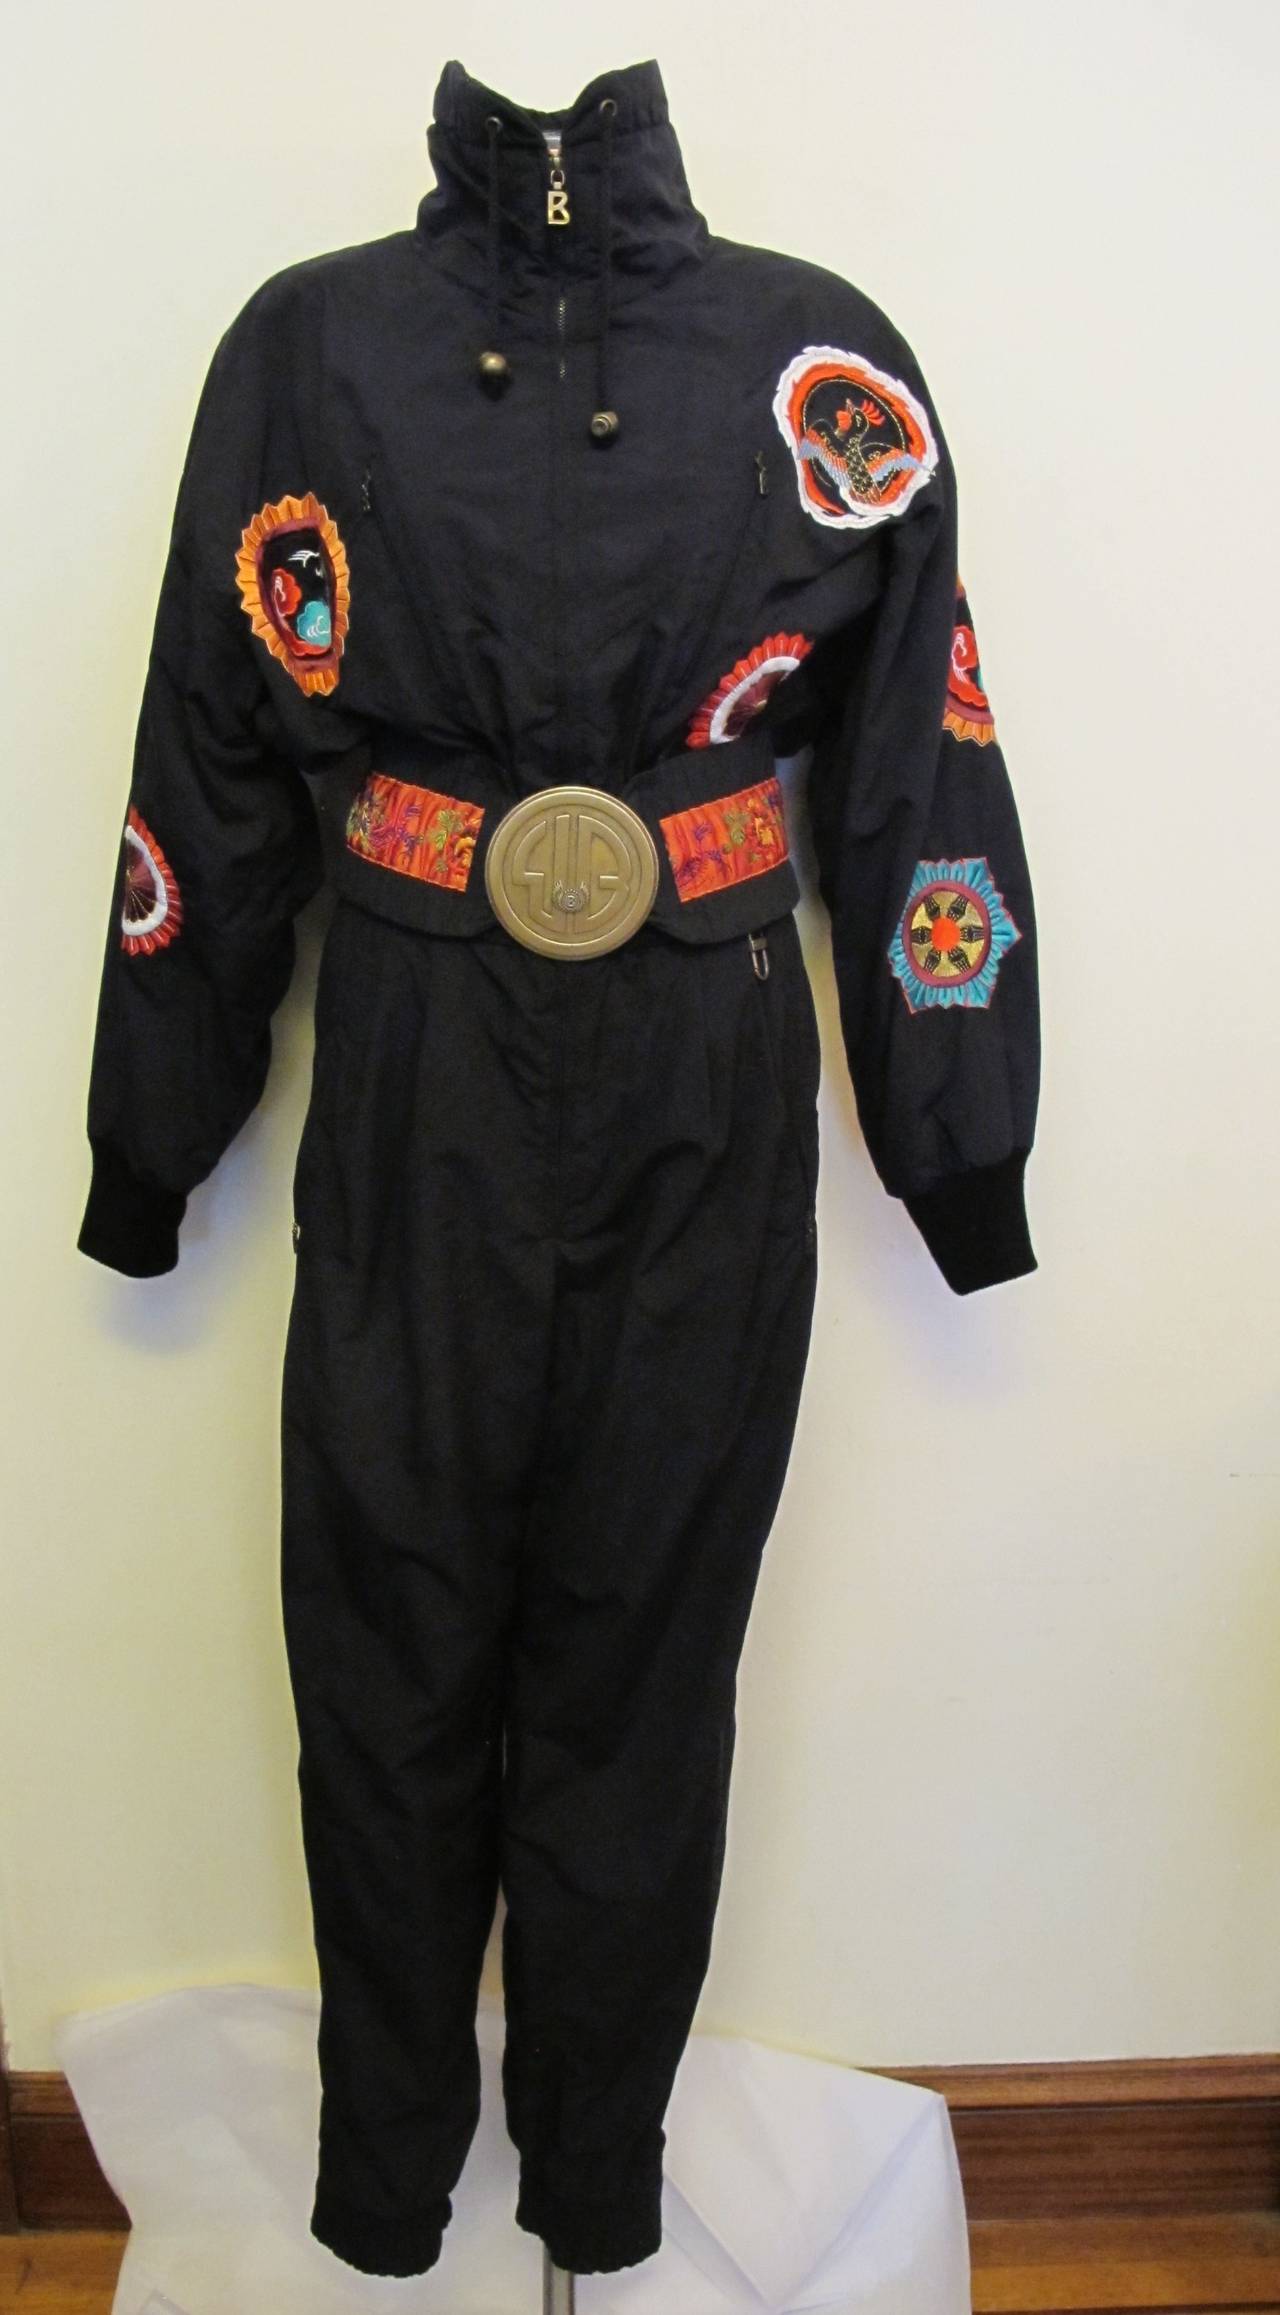 This exciting ski suit, gloves and purse were donated to Helpers by a San Francisco Grande Dame. There are 3 embroidered designs on the front of the jacket - 2 on each sleeve - and 3 on the back. The circular brass belt has the Bogner Logo which